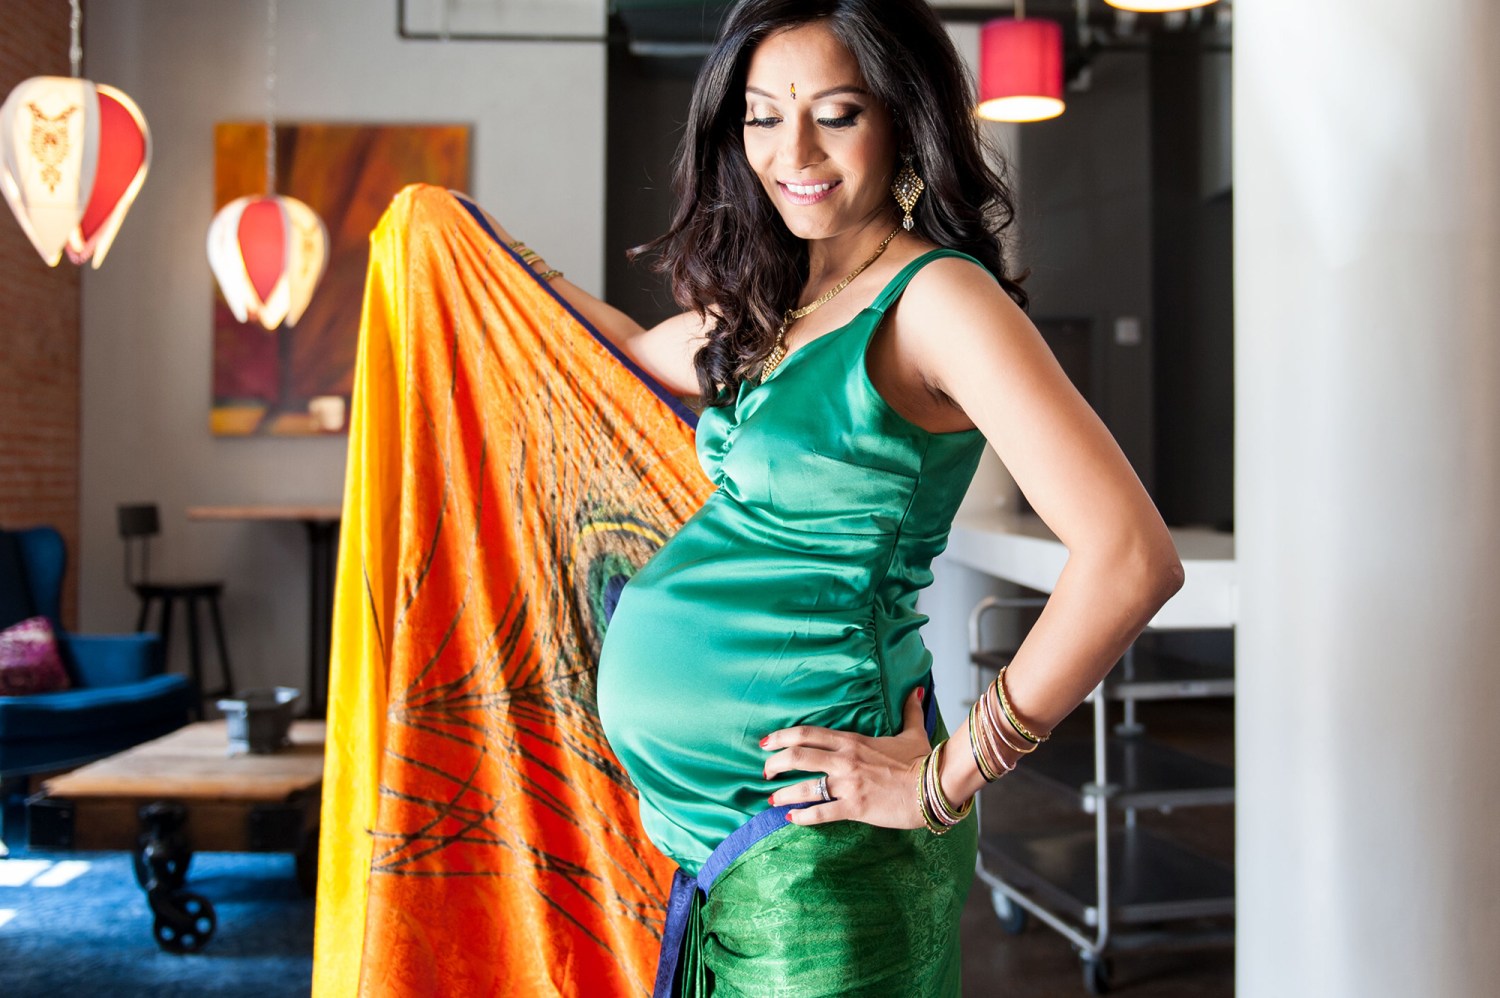 With few options for maternity-friendly saris, this mother wants to change  the market